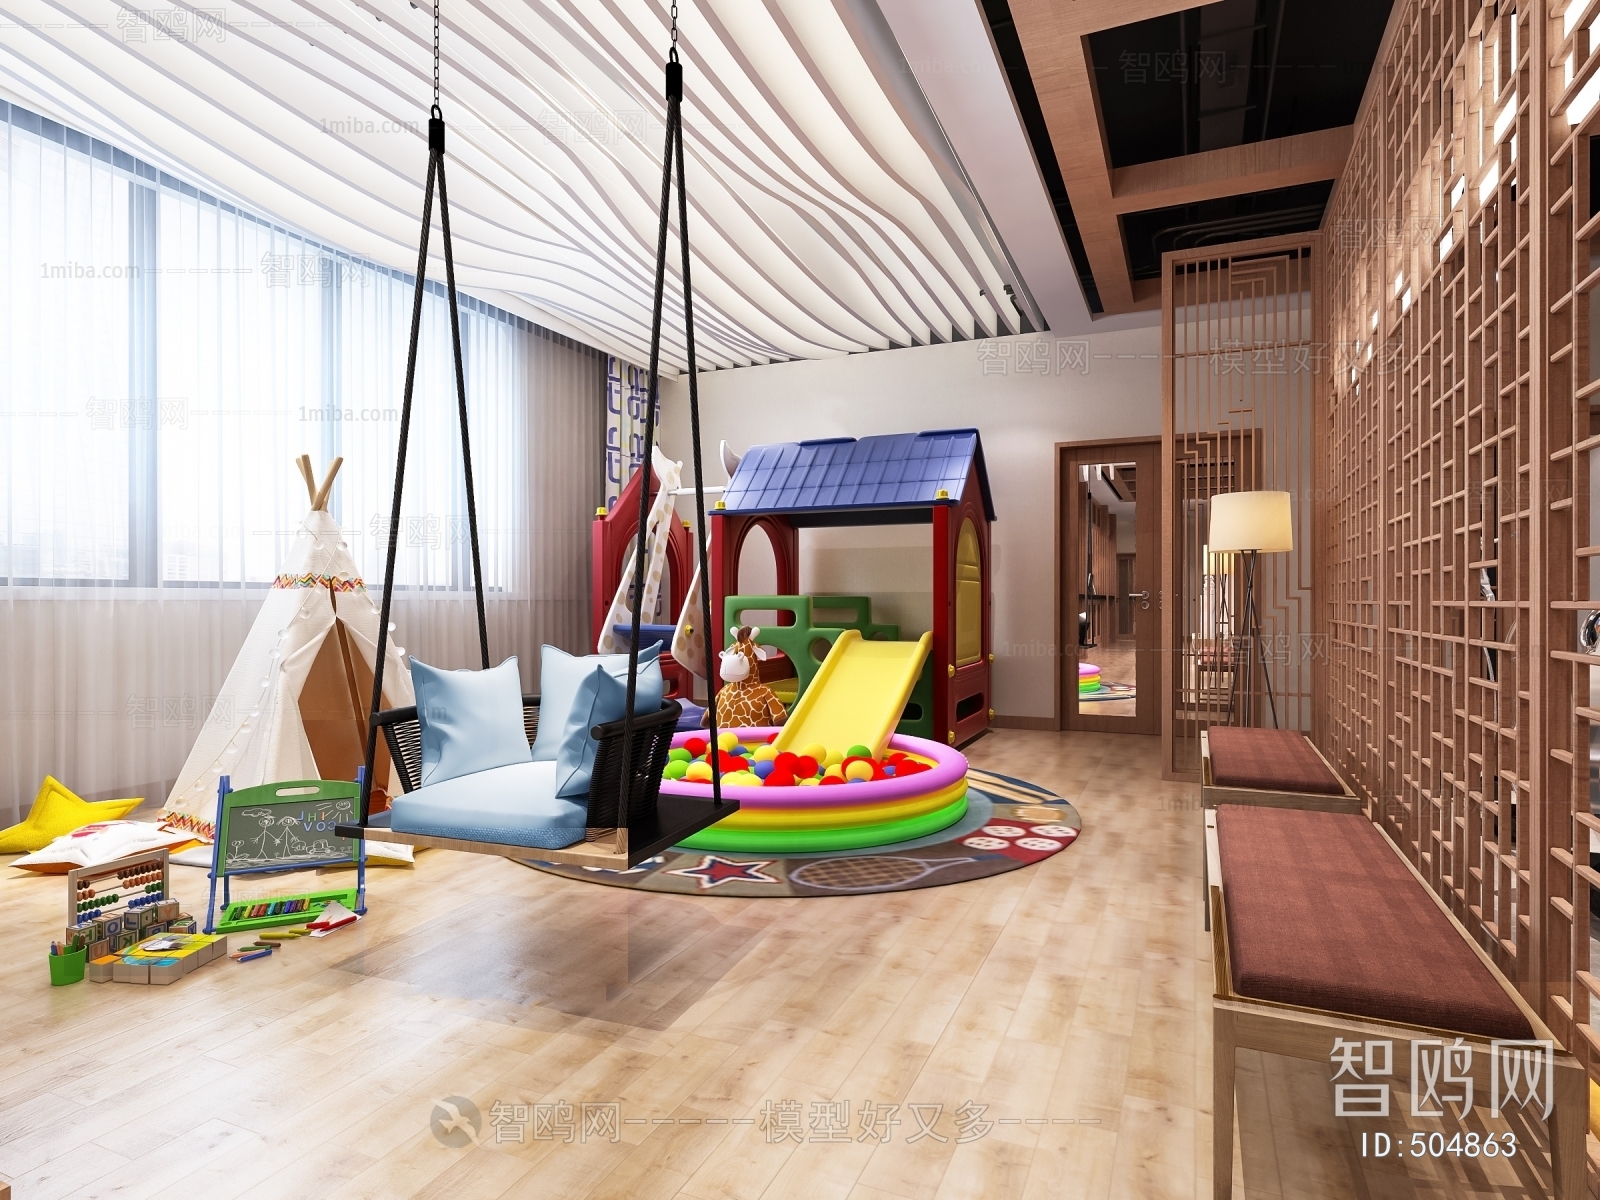 New Chinese Style Children's Playroom